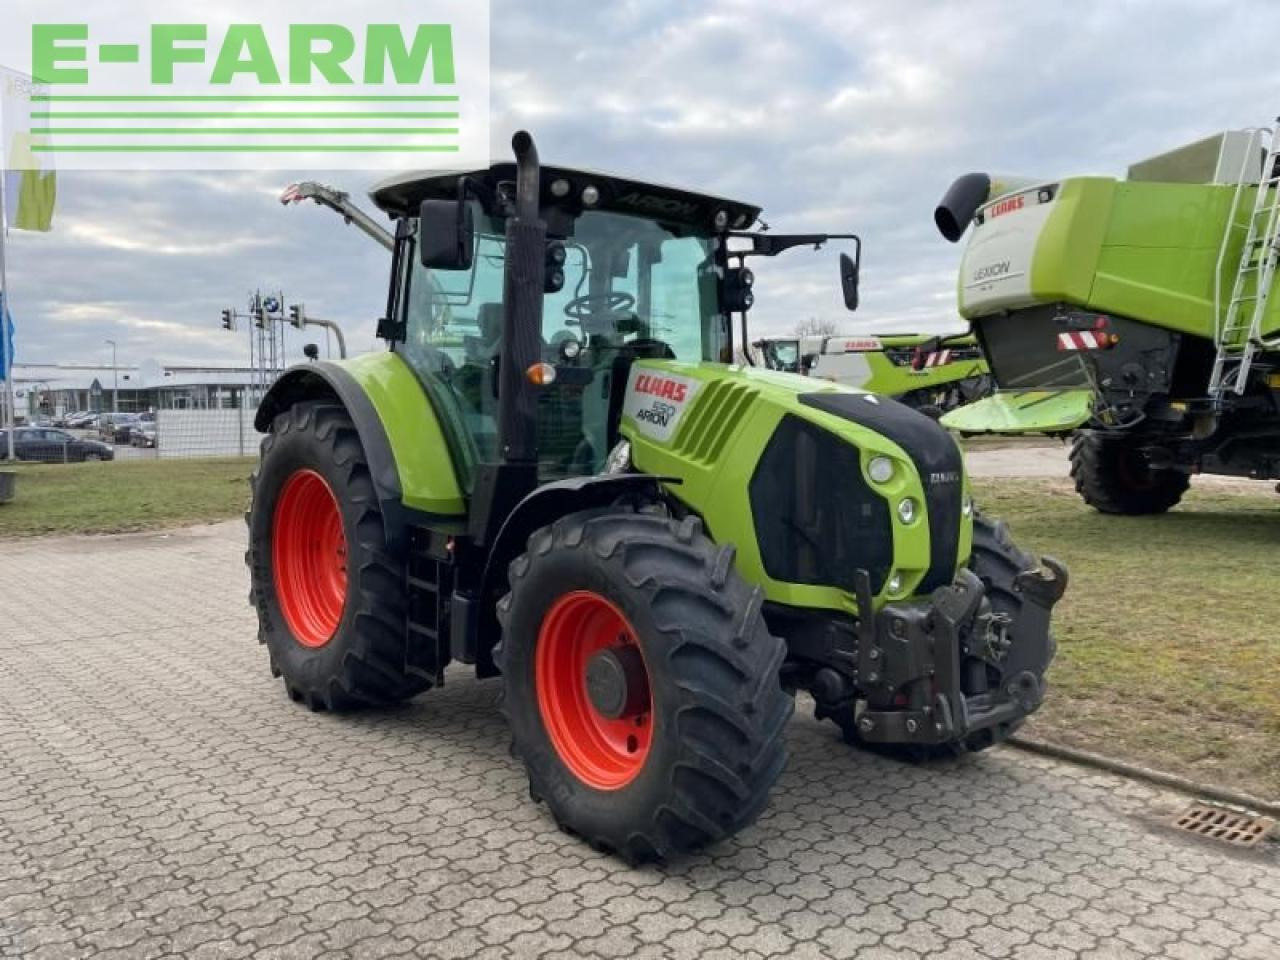 Tractor CLAAS arion 550 t3b: foto 3